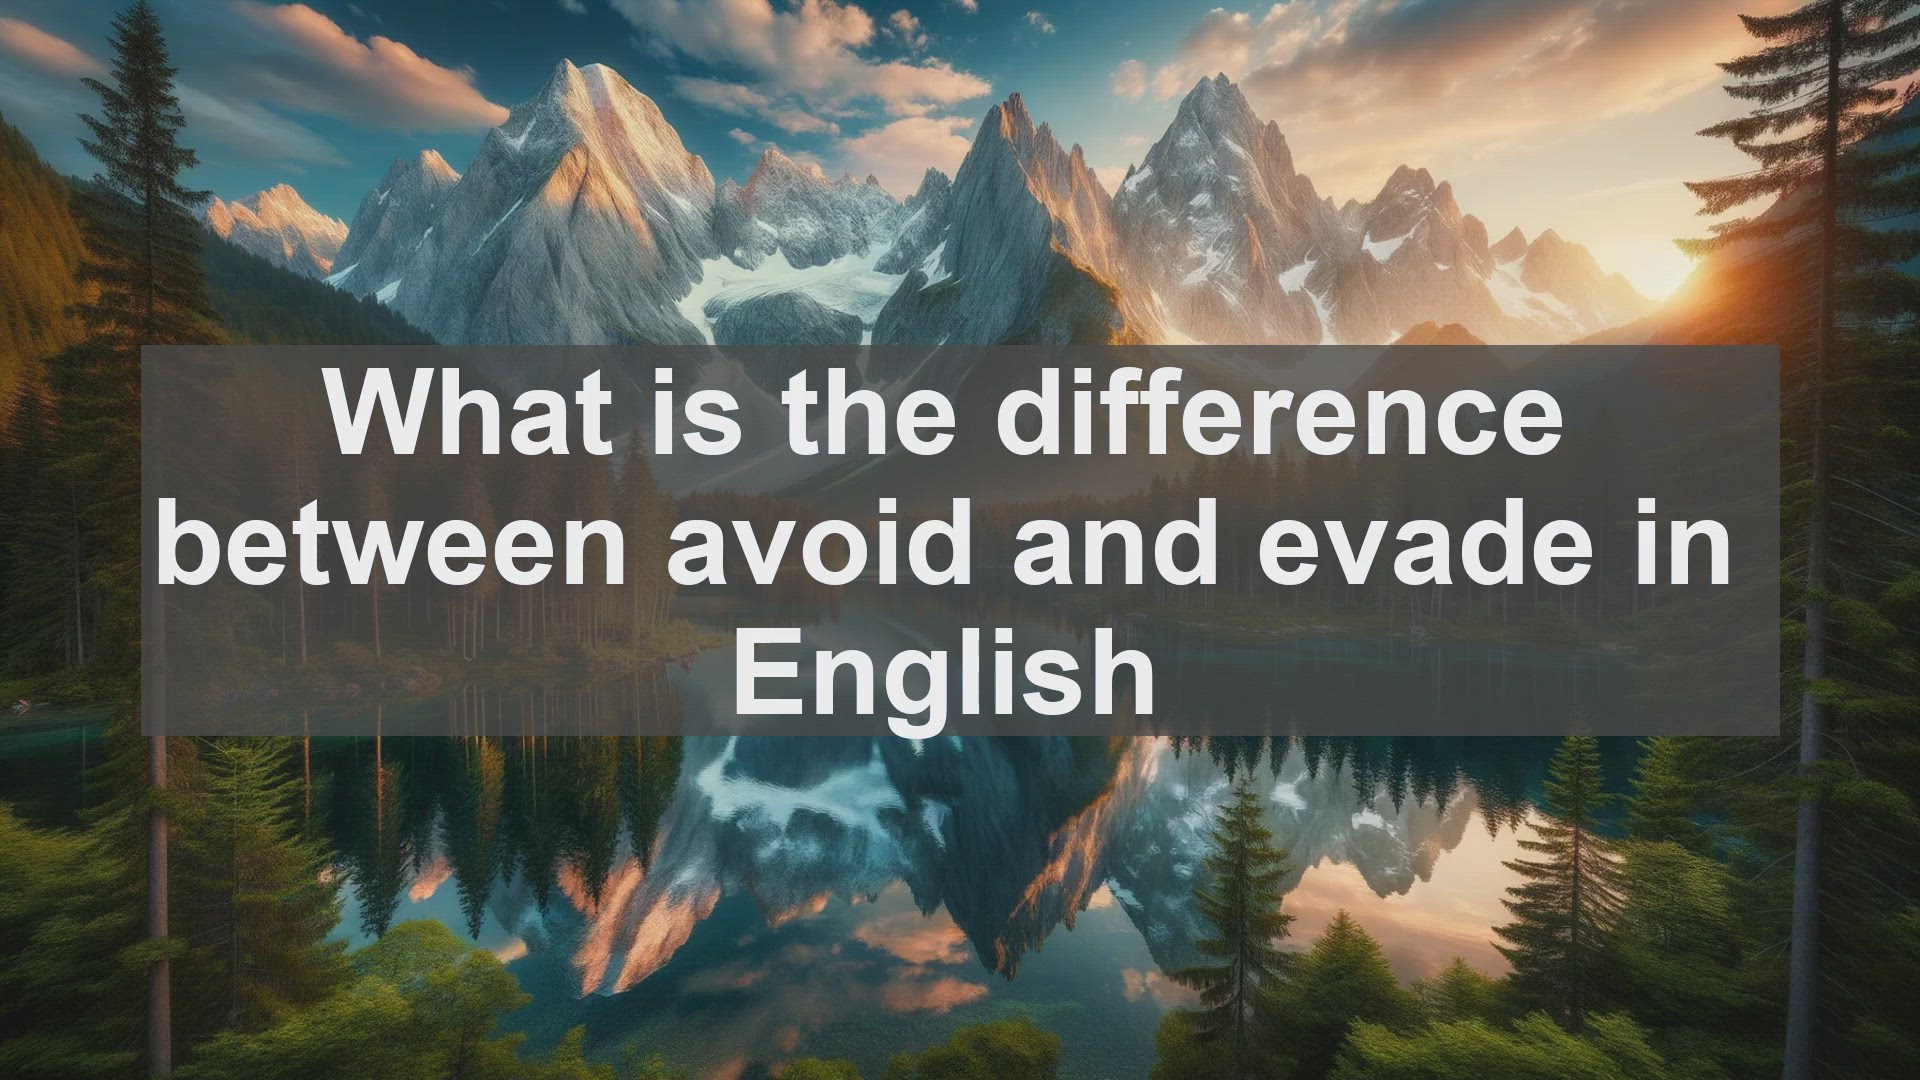 What is the difference between avoid and evade in English?